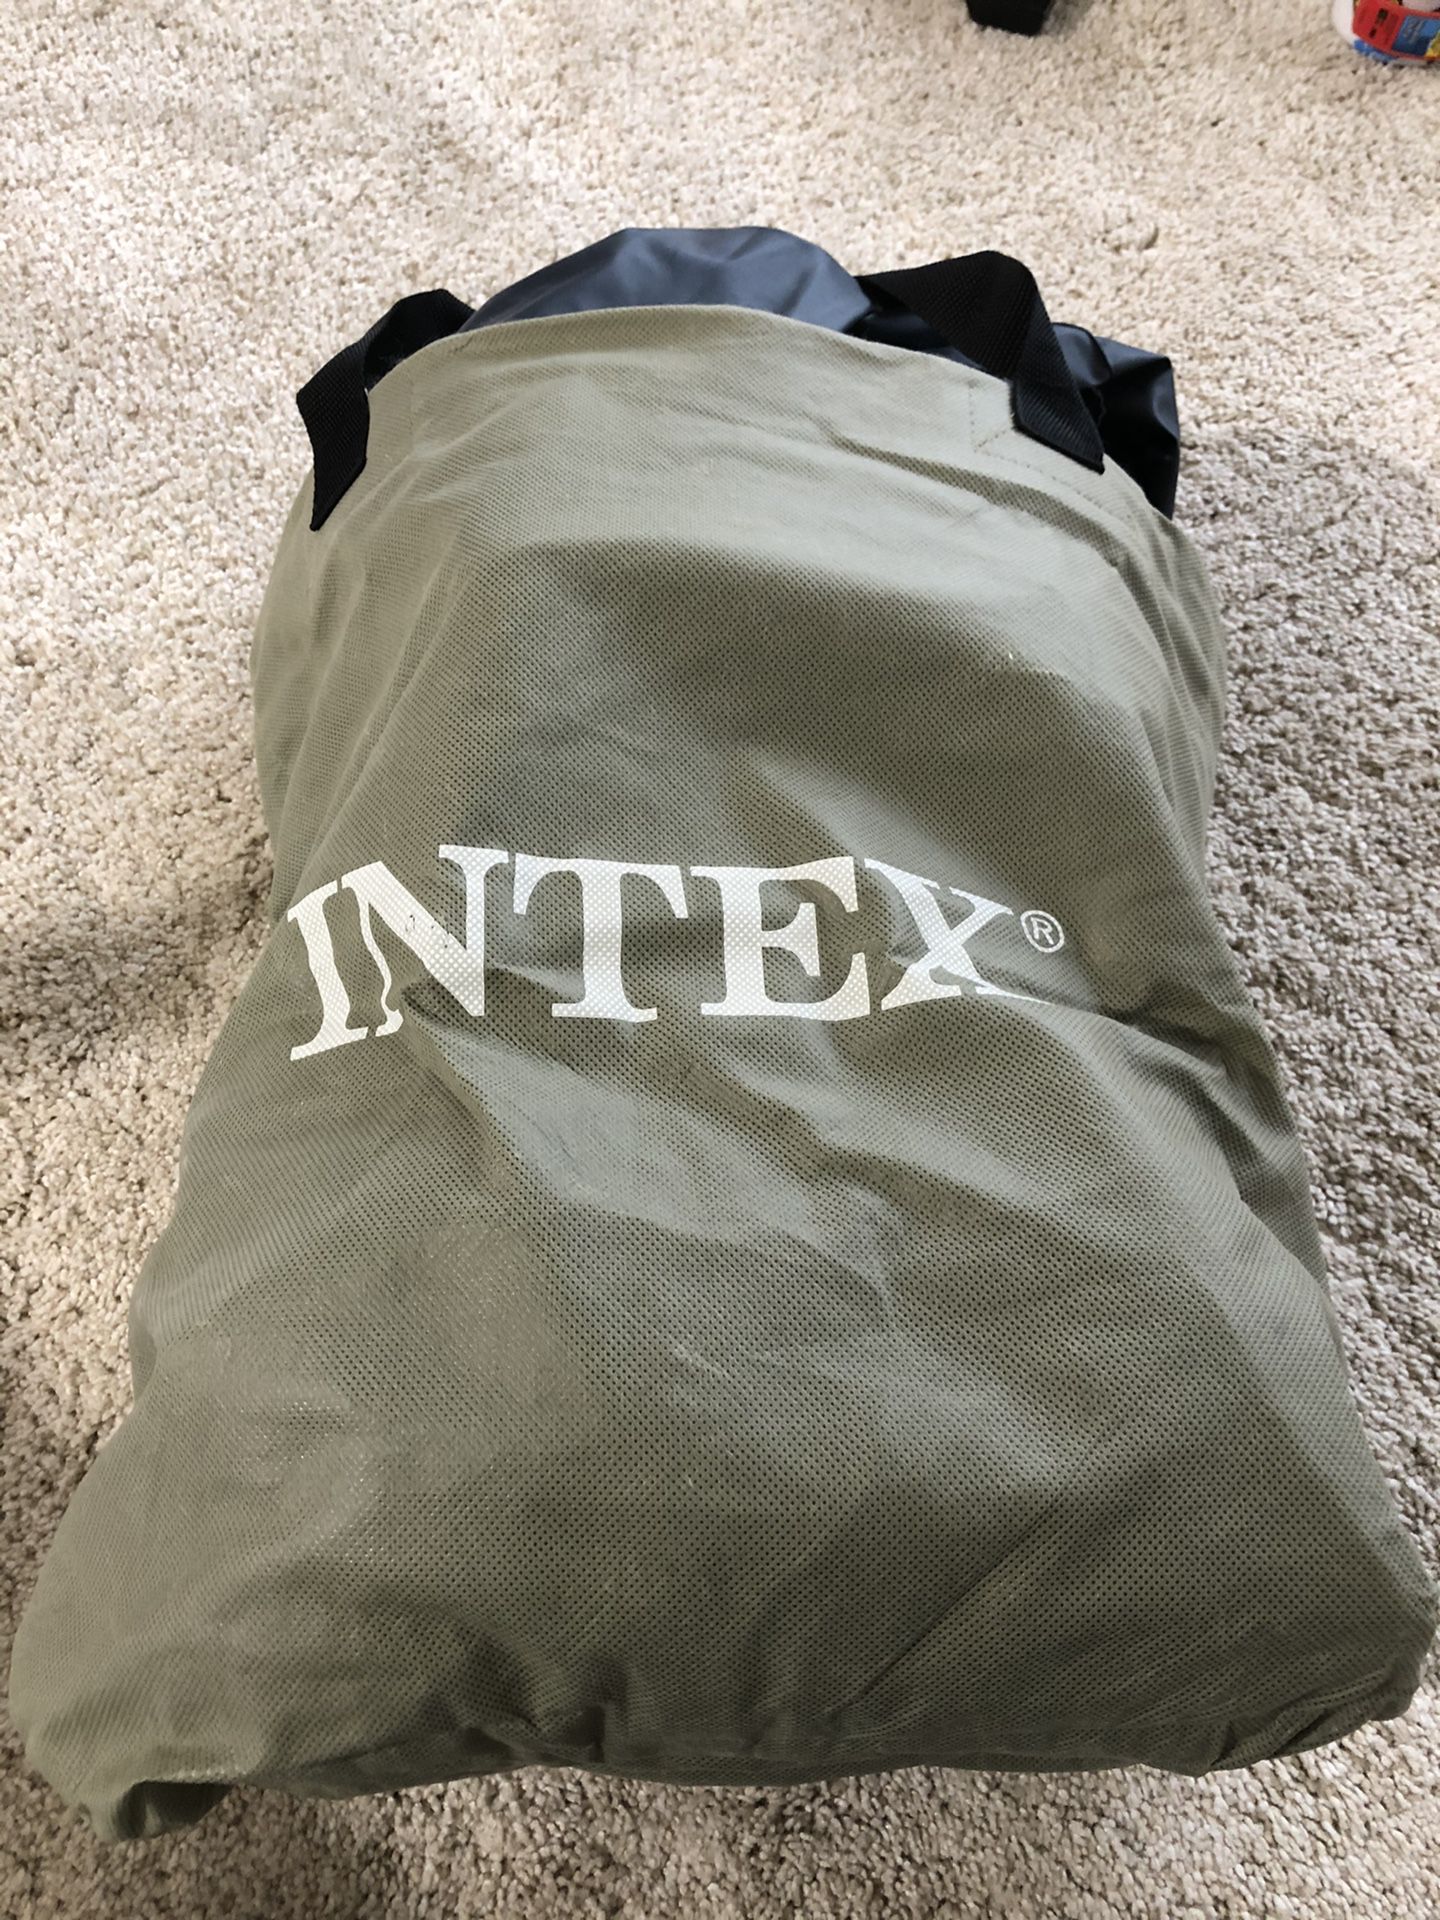 INTEX inflating air bed full size with electric air pump